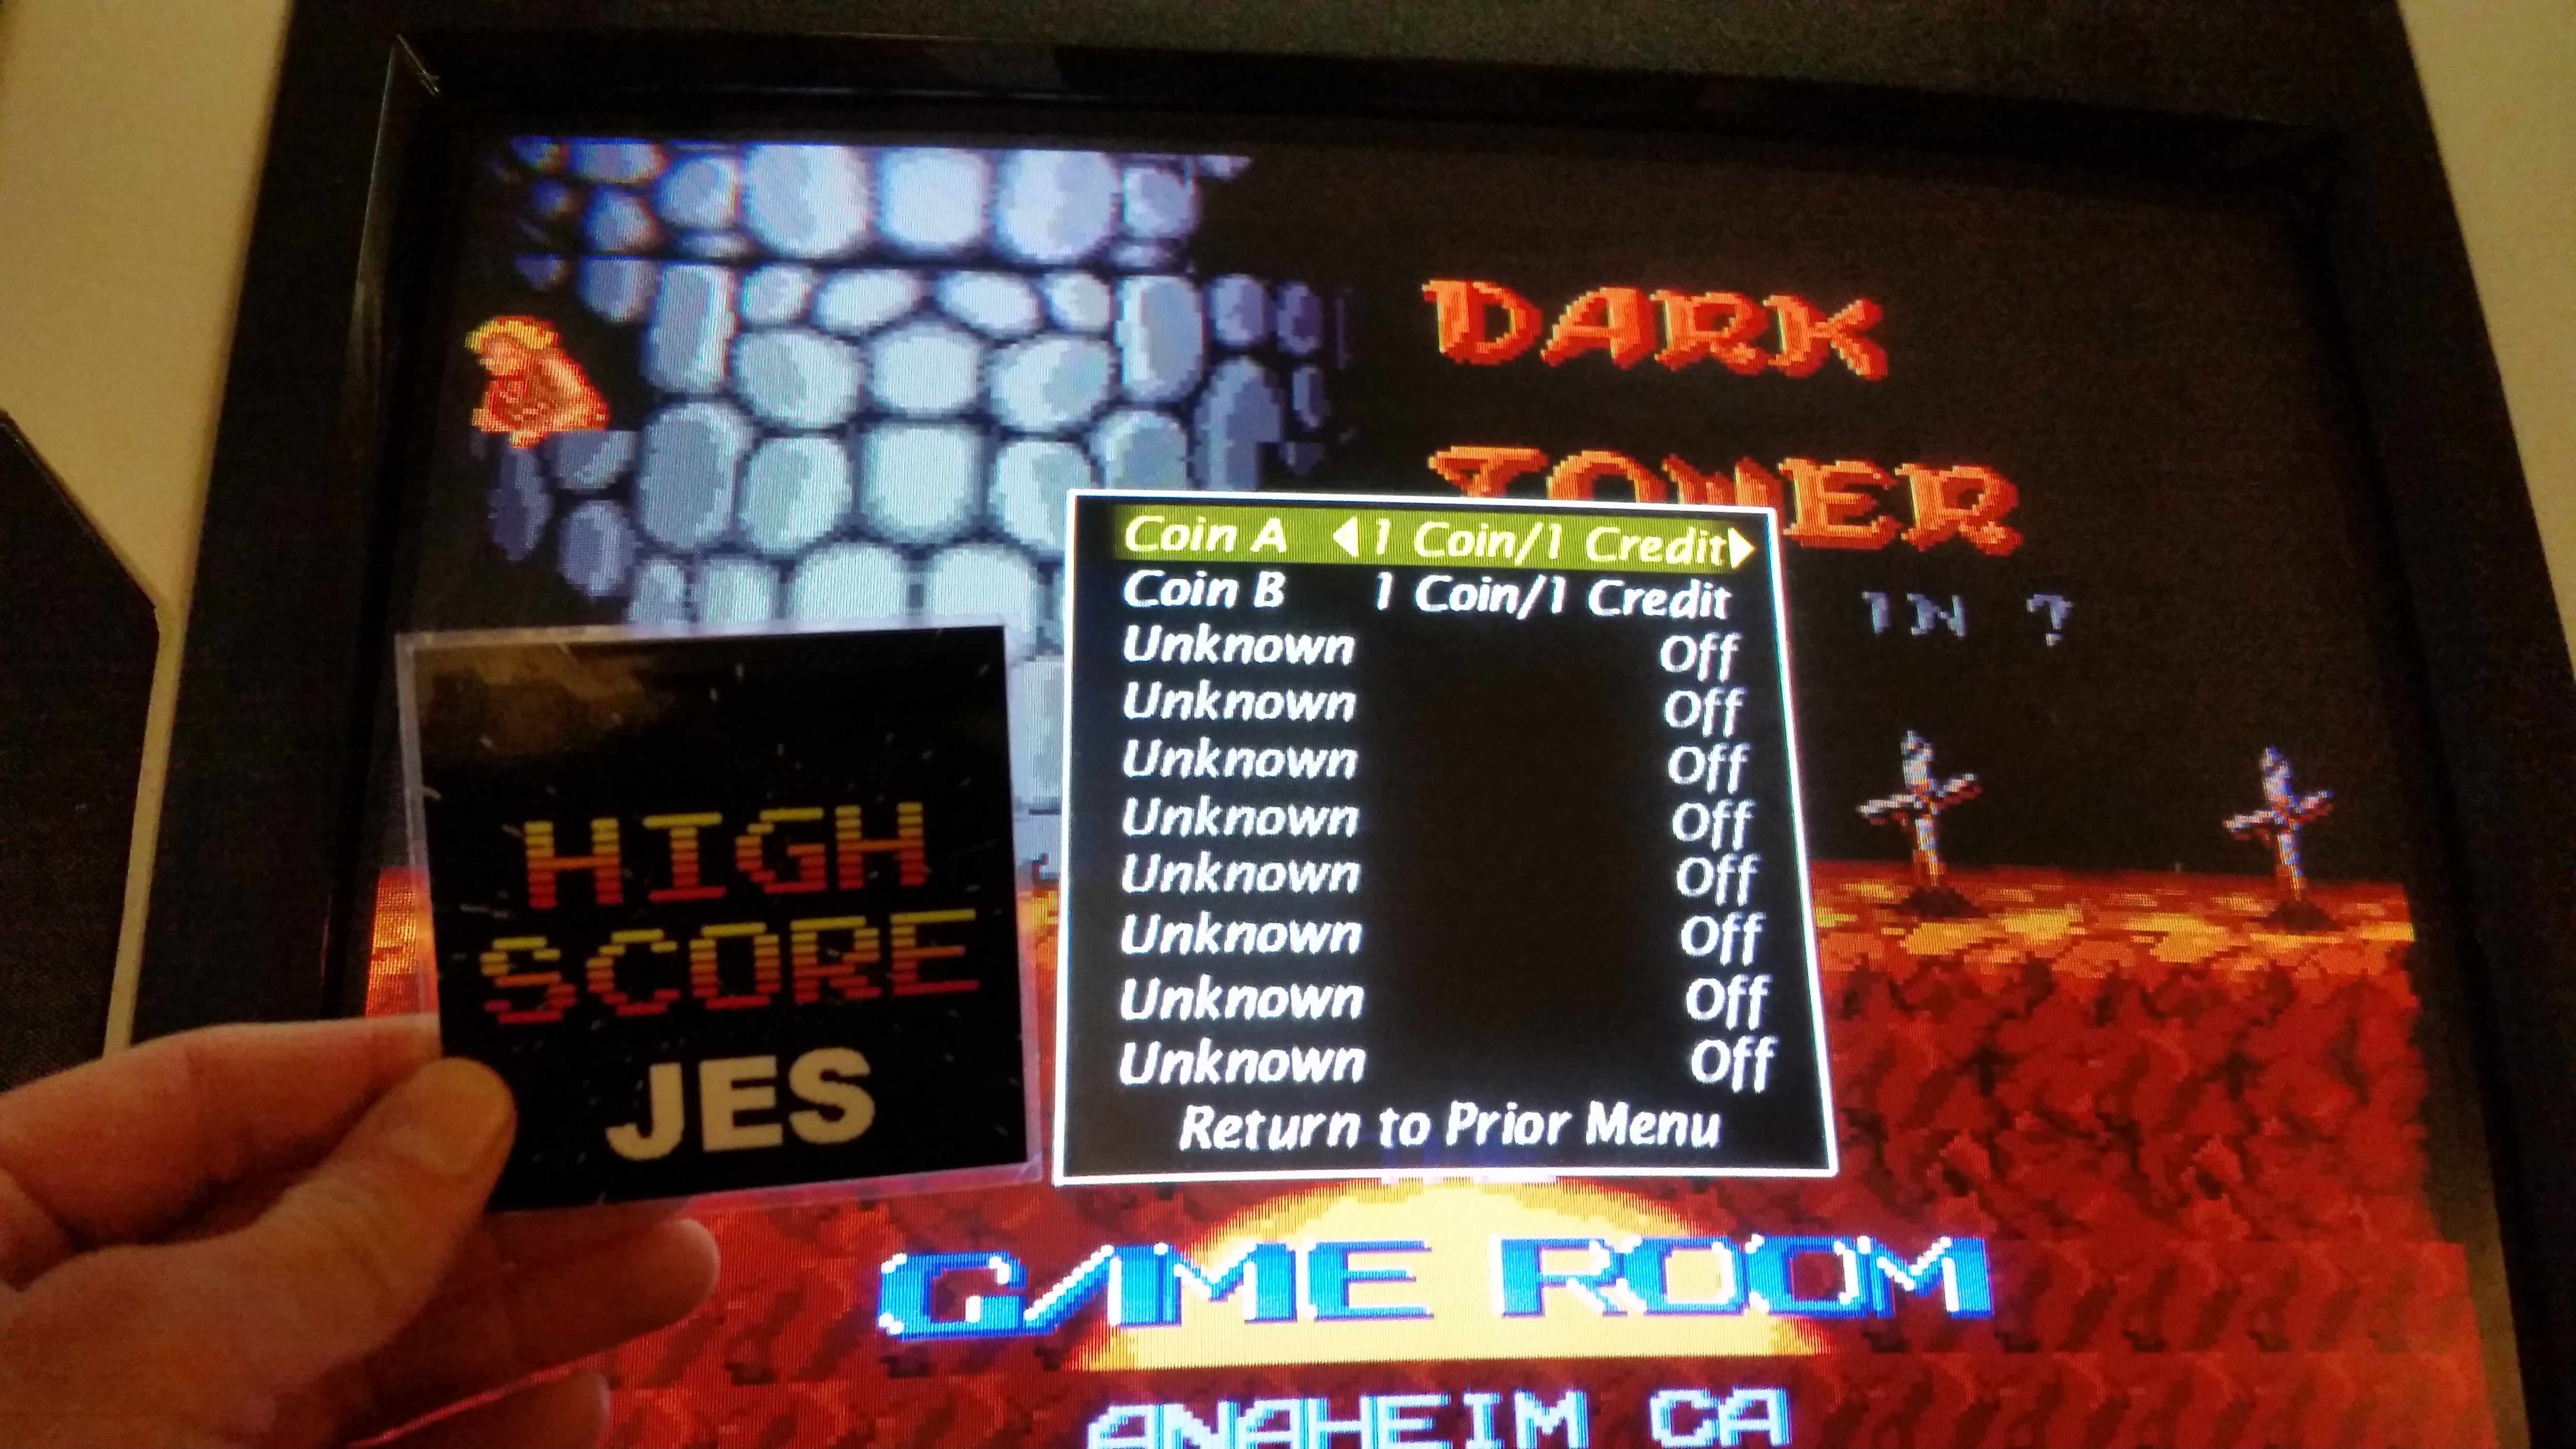 JES: Dark Tower (Arcade Emulated / M.A.M.E.) 96,350 points on 2016-12-17 21:43:02